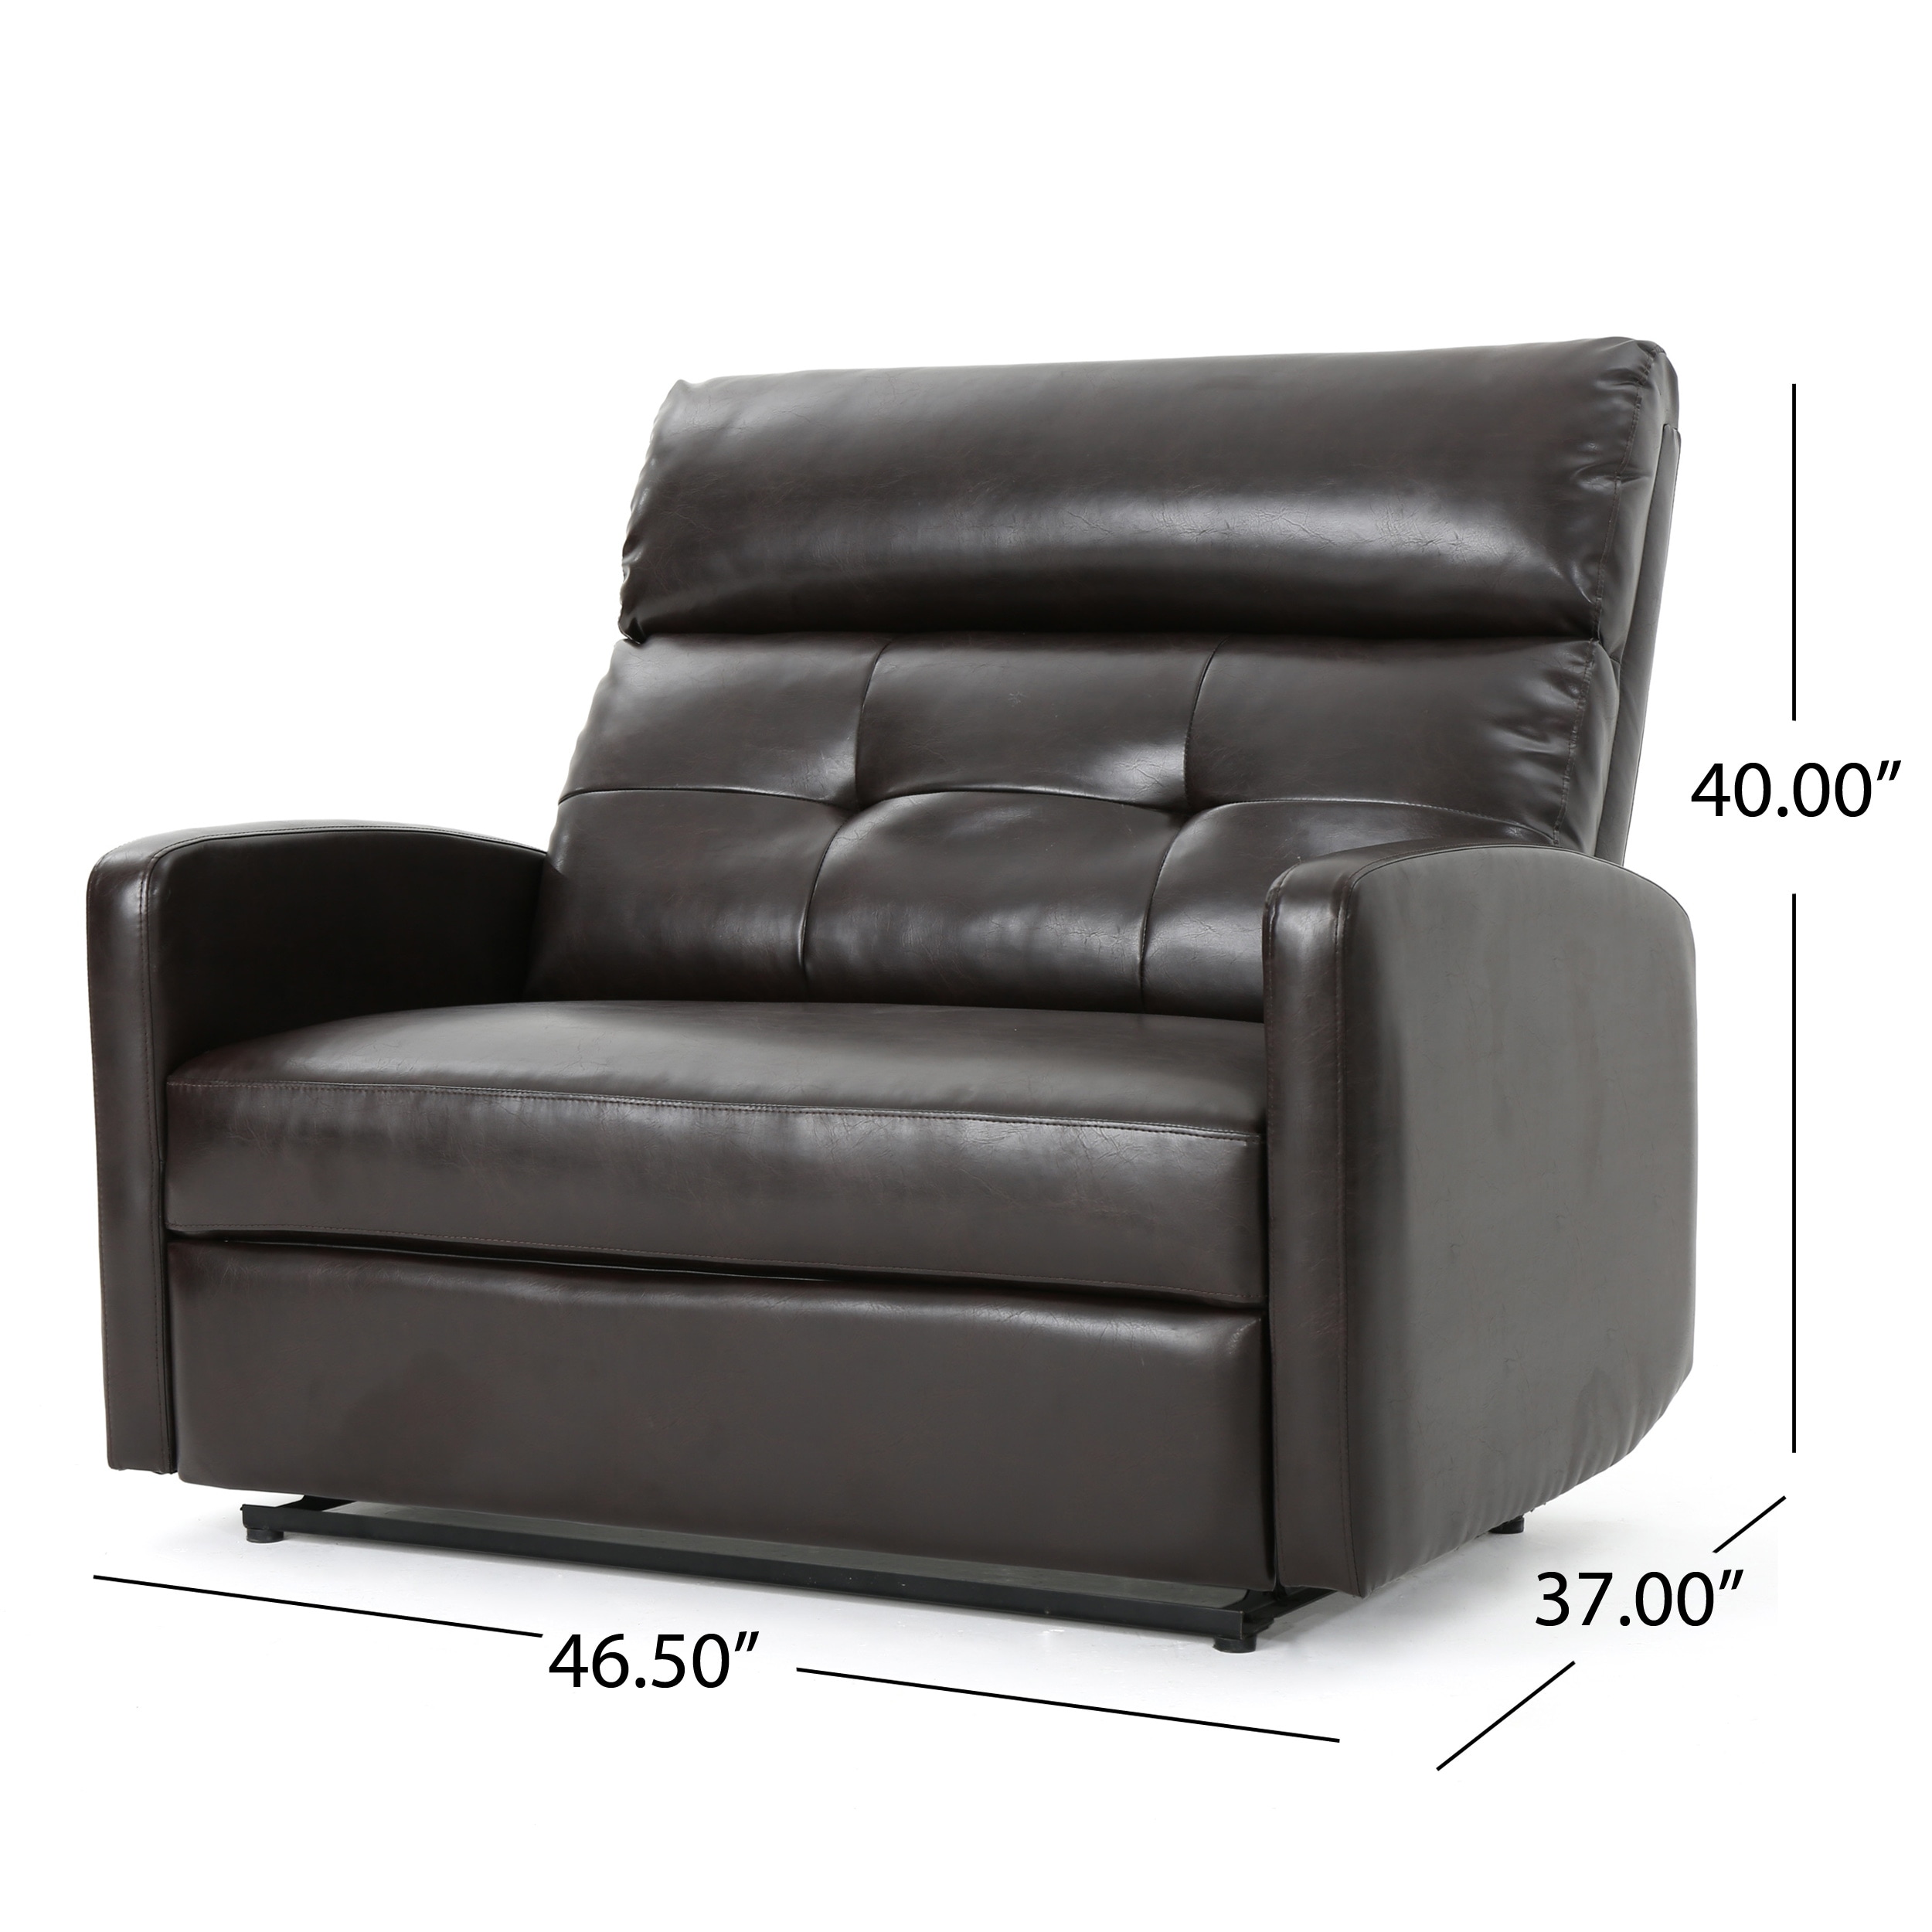 Halima Faux Leather 2-Seater Recliner Club Chair by Christopher Knight Home